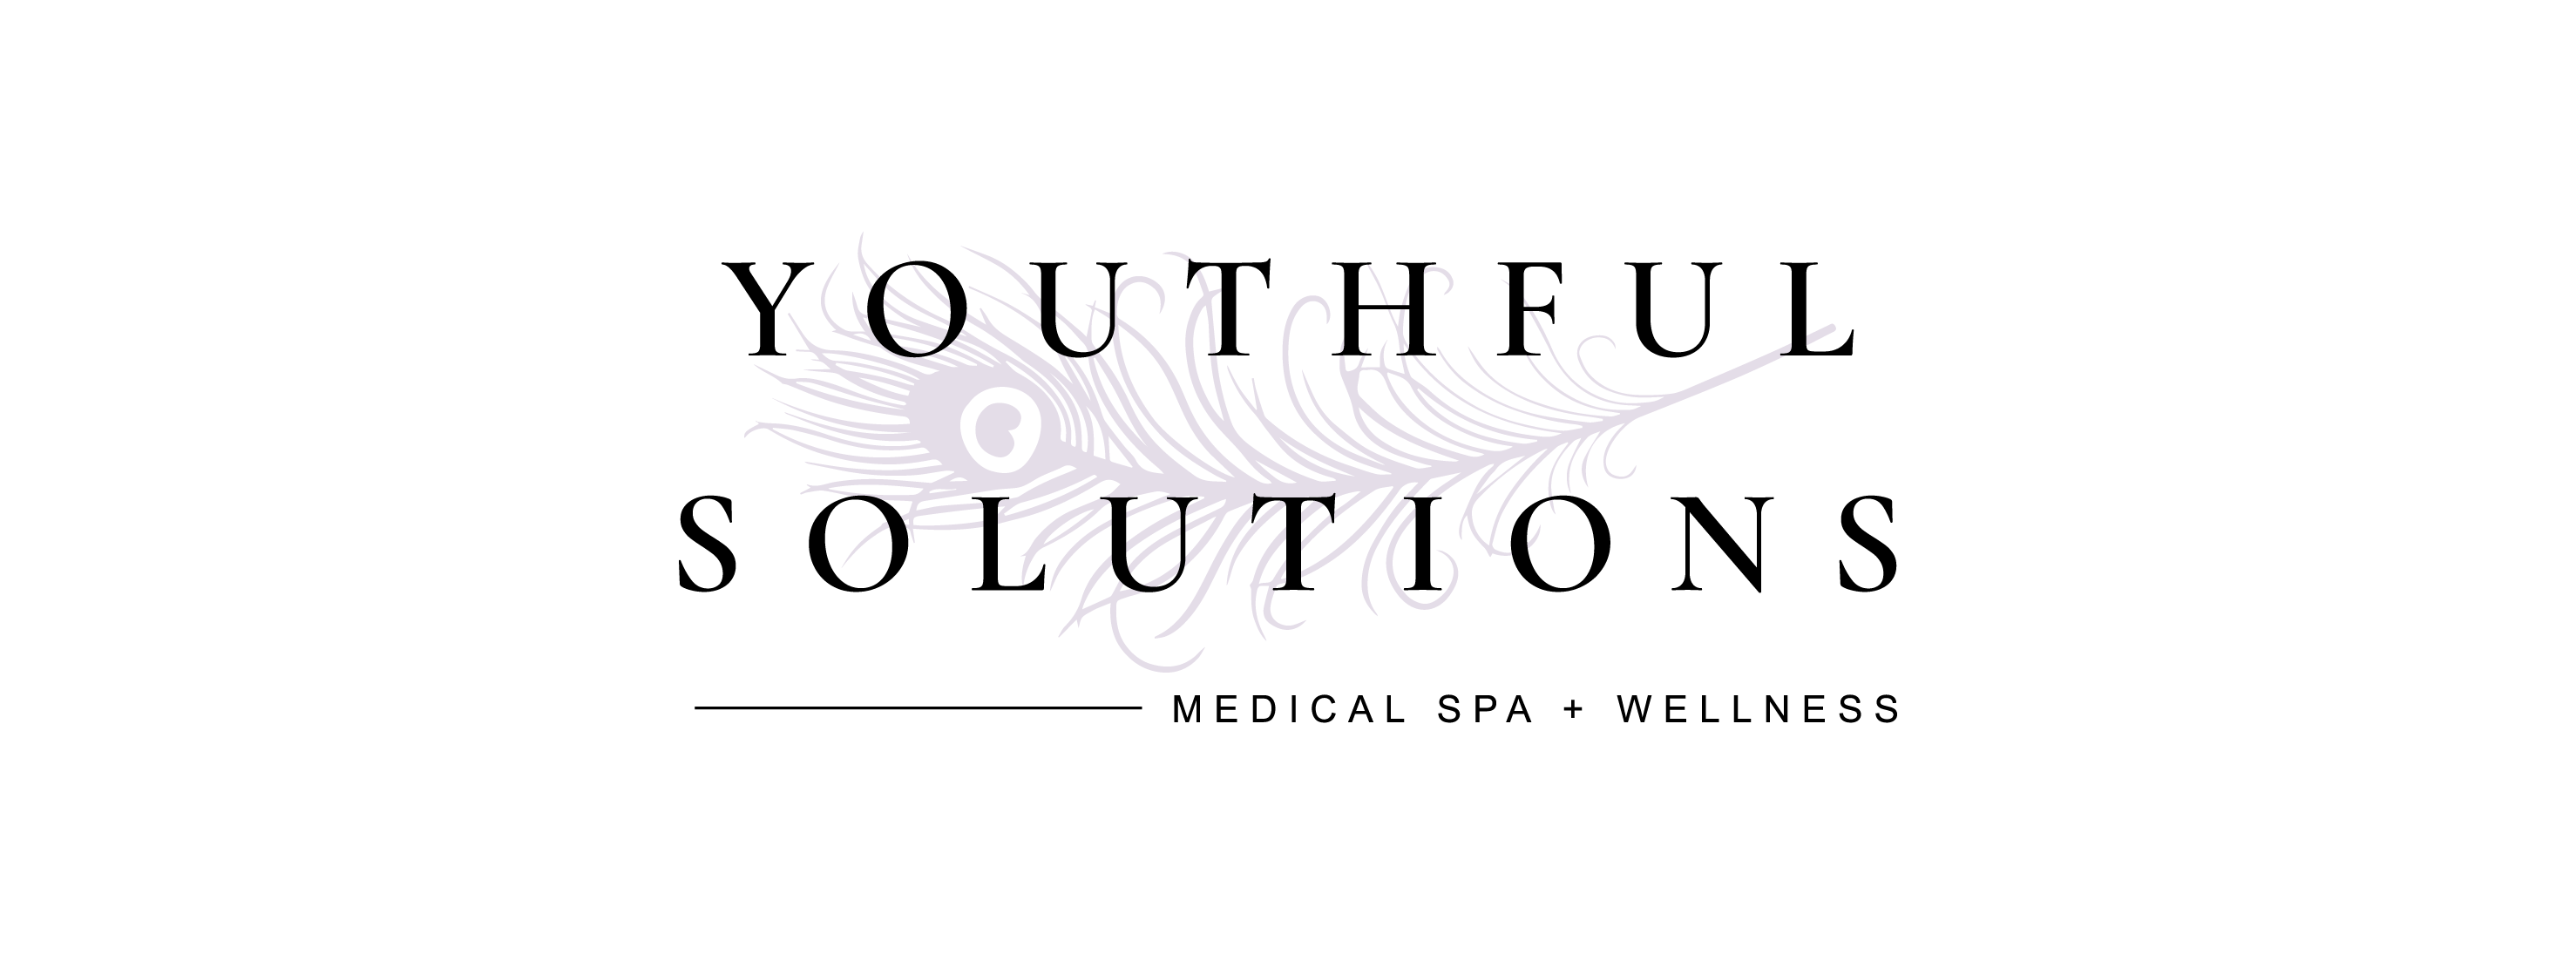 Youthful Solutions MediSpa and Wellness